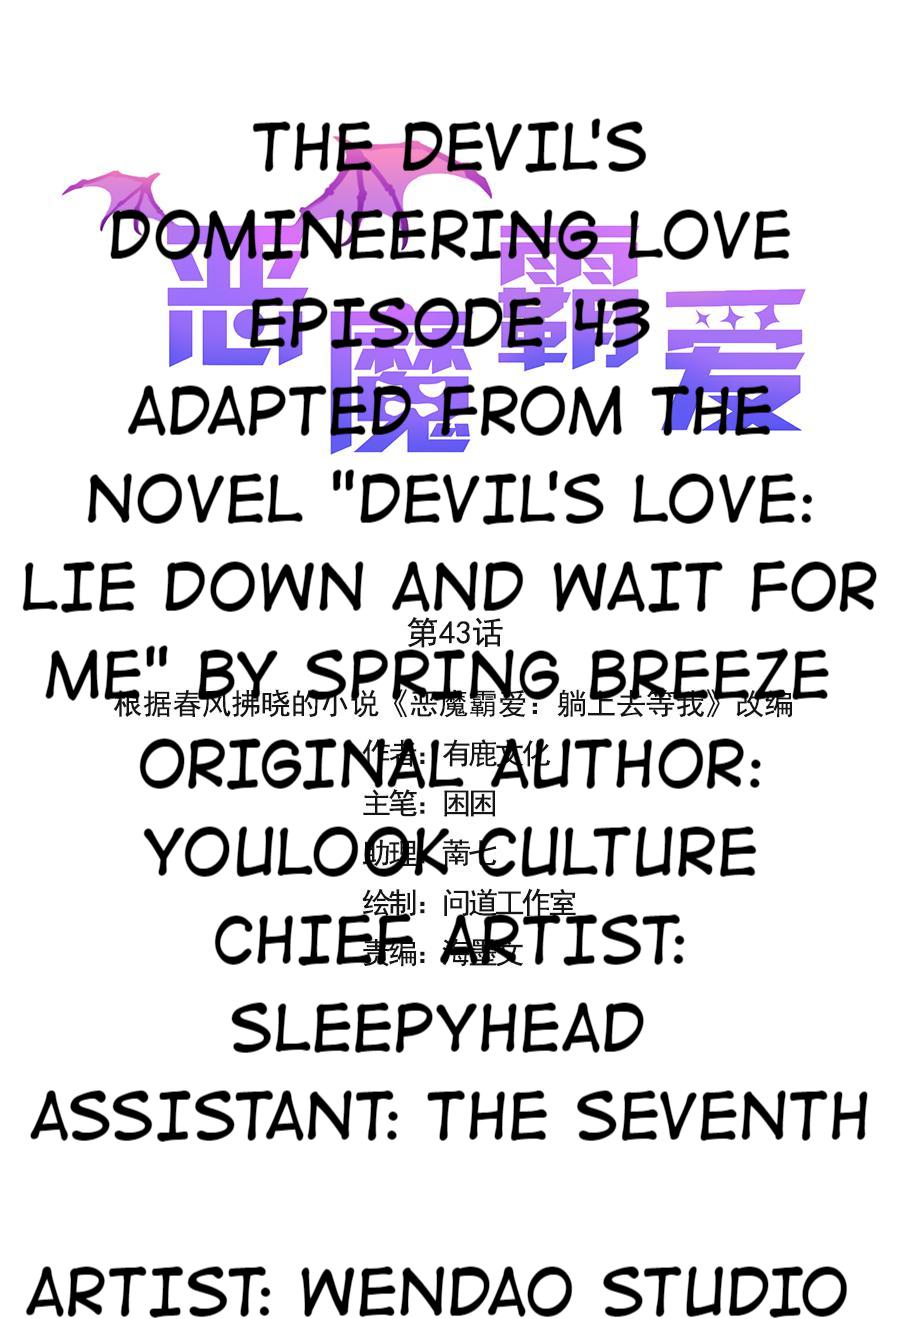 The Devil's Domineering Love - Page 1